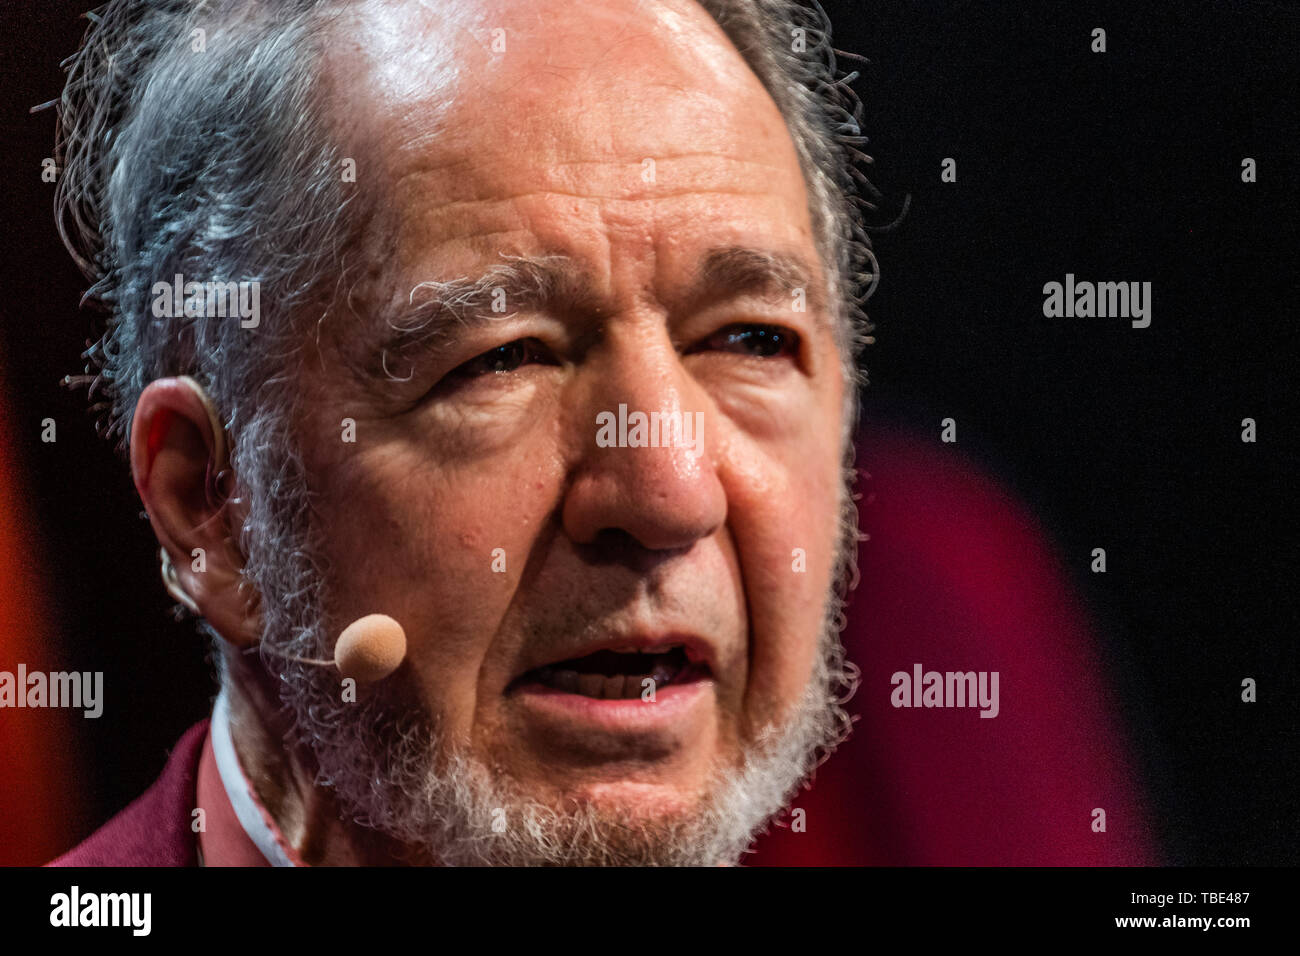 The Hay Festival, Hay on Wye, Wales UK , Saturday 01 June  2019.  JARED DIAMOND, American geographer, historian, and author best known for his popular science books The Third Chimpanzee (1991); Guns, Germs, and Steel (1997, which was awarded a Pulitzer Prize); Collapse (2005); and The World Until Yesterday (2012)..  Appearing on stage at the 2019 Hay Festival  The festival, now in its 32nd year, held annually in the small town of Hay on Wye on the Wales - England border,  attracts the finest writers, politicians and intellectuals from  across the globe for 10 days of talks and discussions, cel Stock Photo